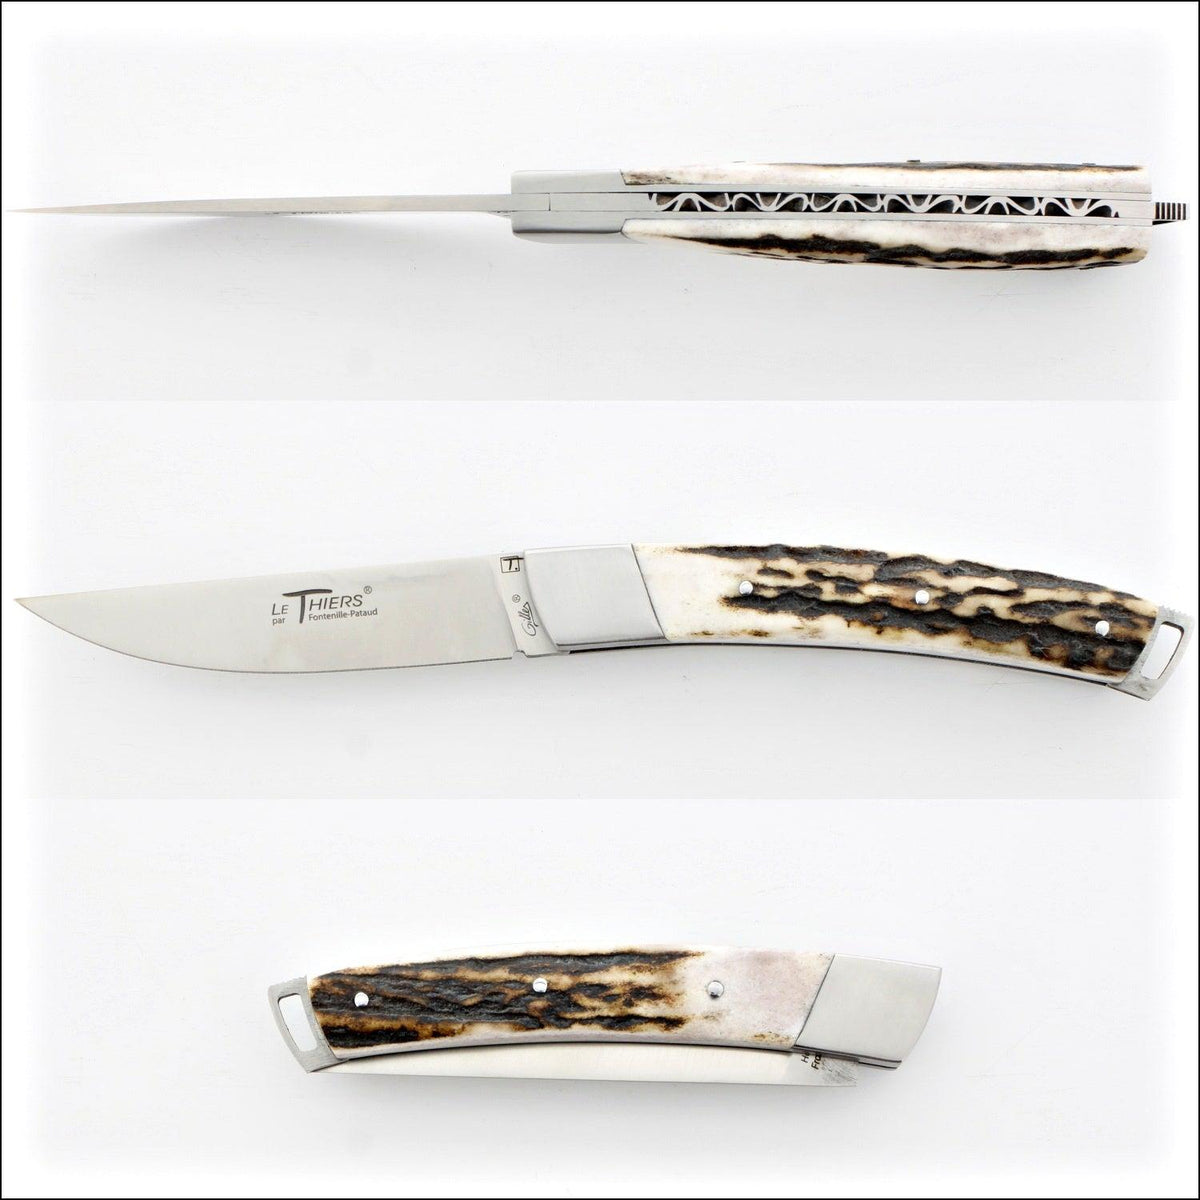 Le Thiers® Nature 11 cm Pocket Knife Deer Stag